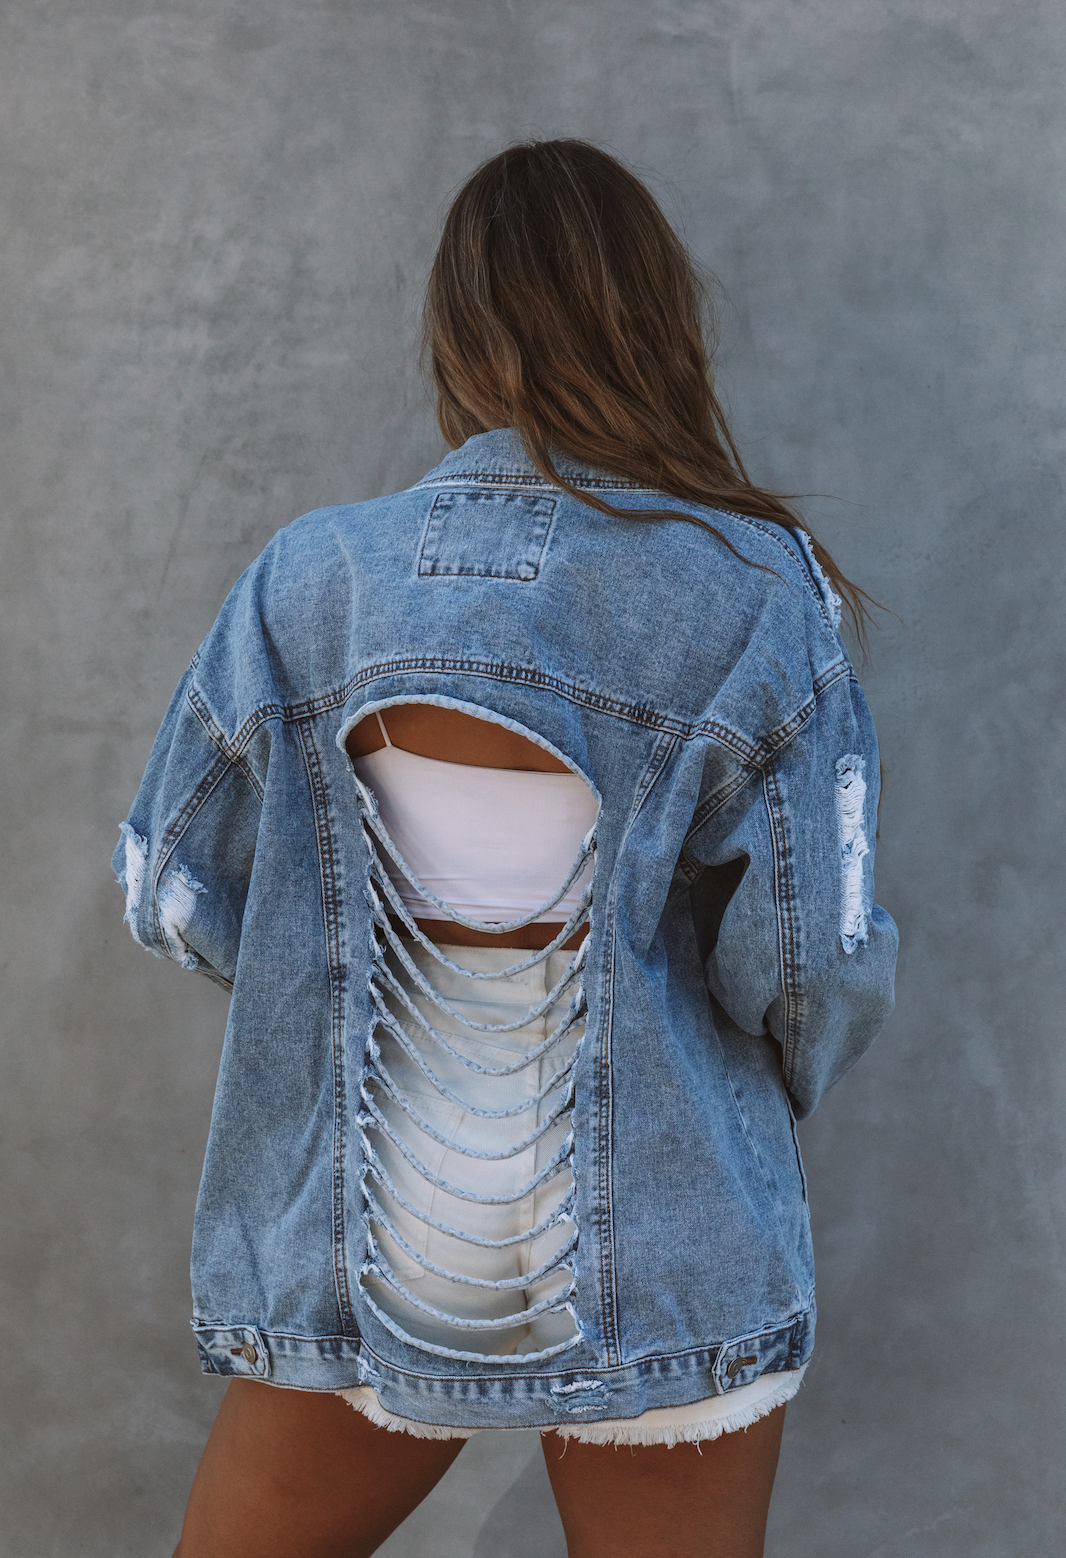 The Tearing Up My Heart Denim Jacket